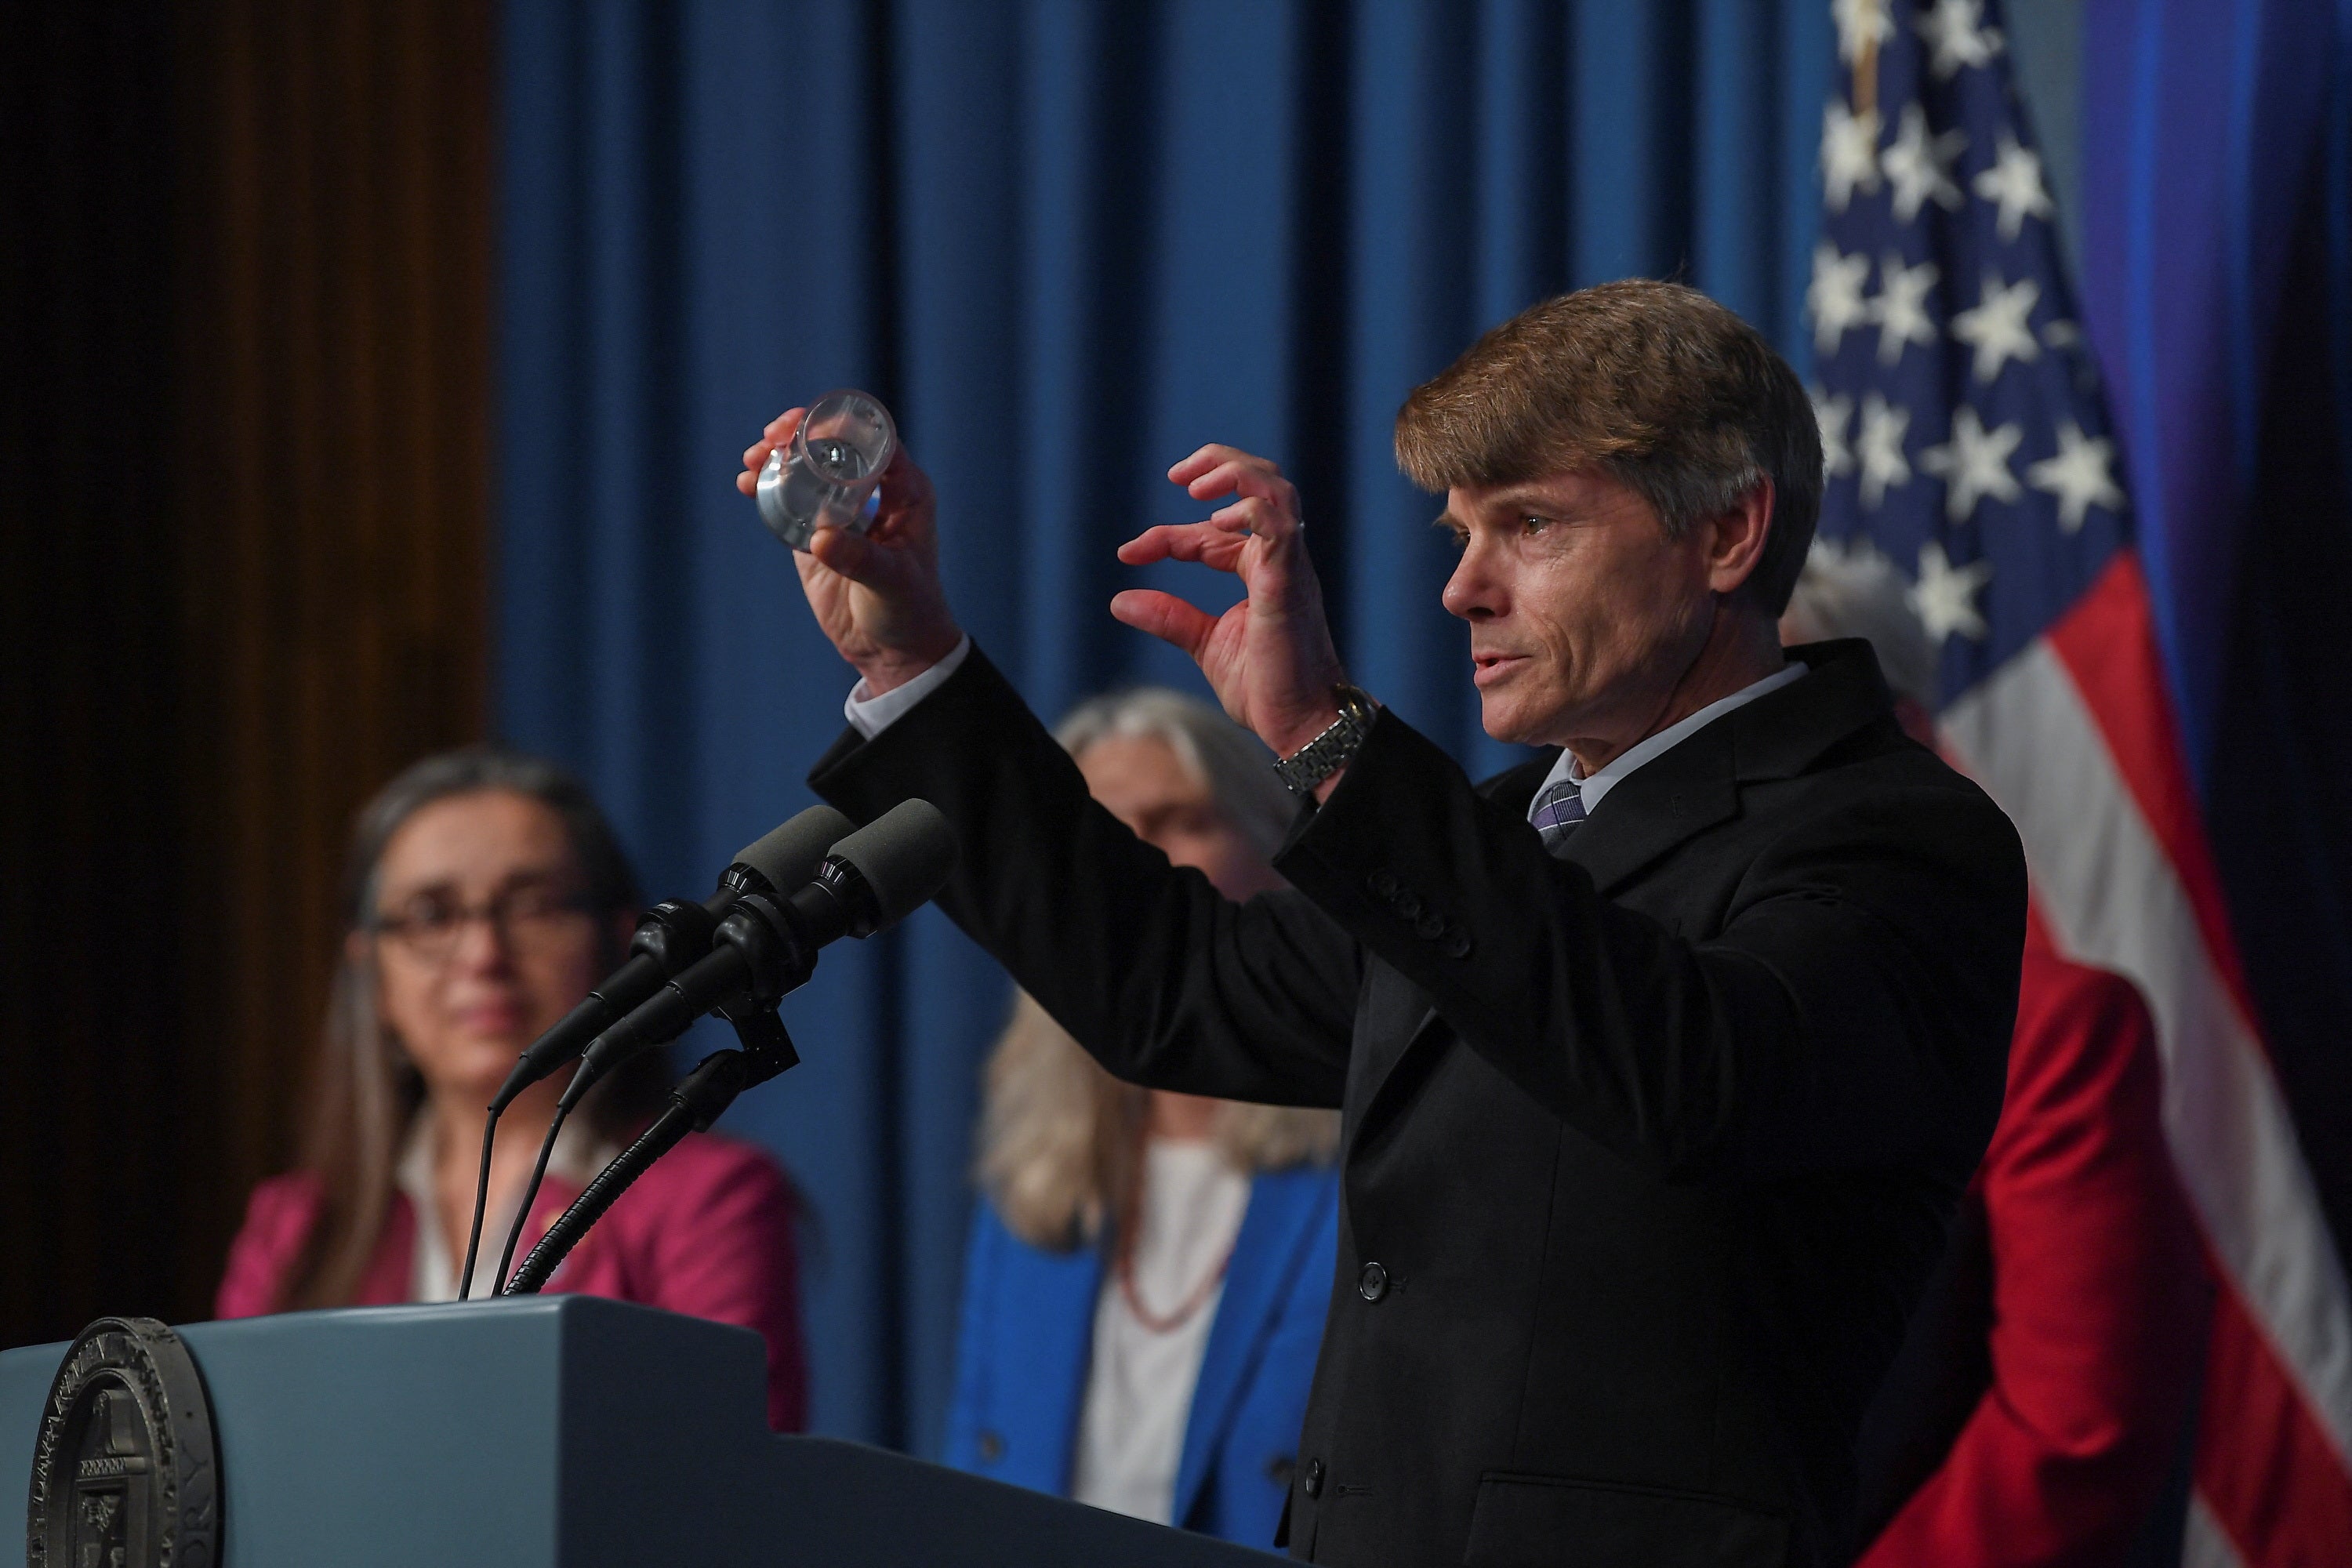 Dr. Marvin Adams, Deputy Administrator for Defense Programs of the Department of Energy's National Nuclear Security Administration holds up a visual aid